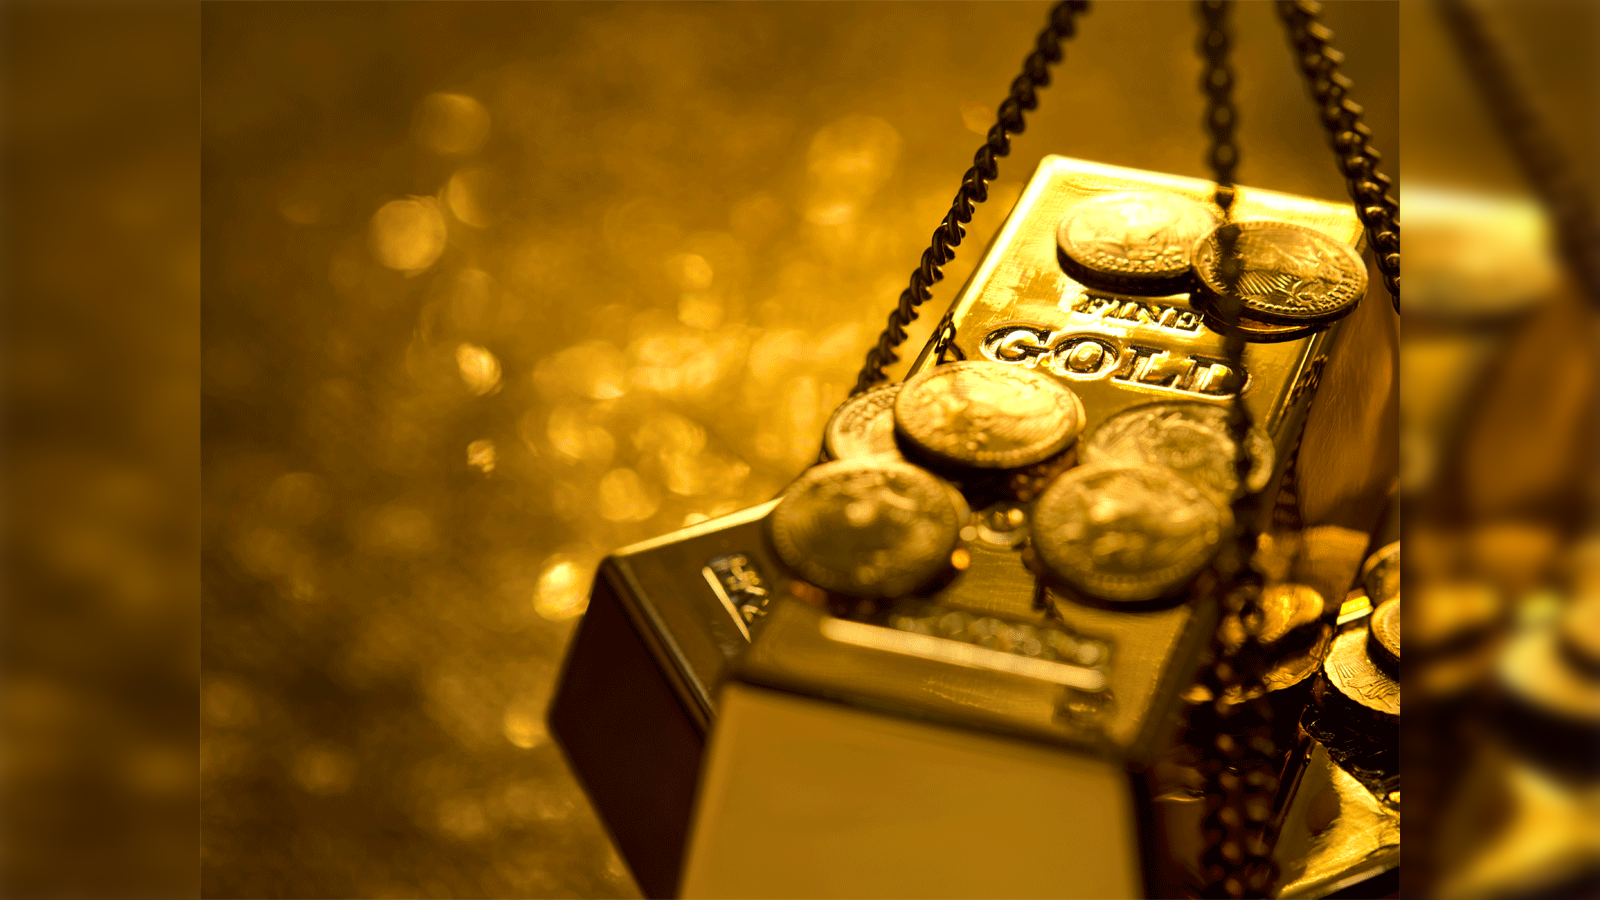 Gold Prices Today: Gold Rates Edge Higher; Silver Trades Below Rs 60,800